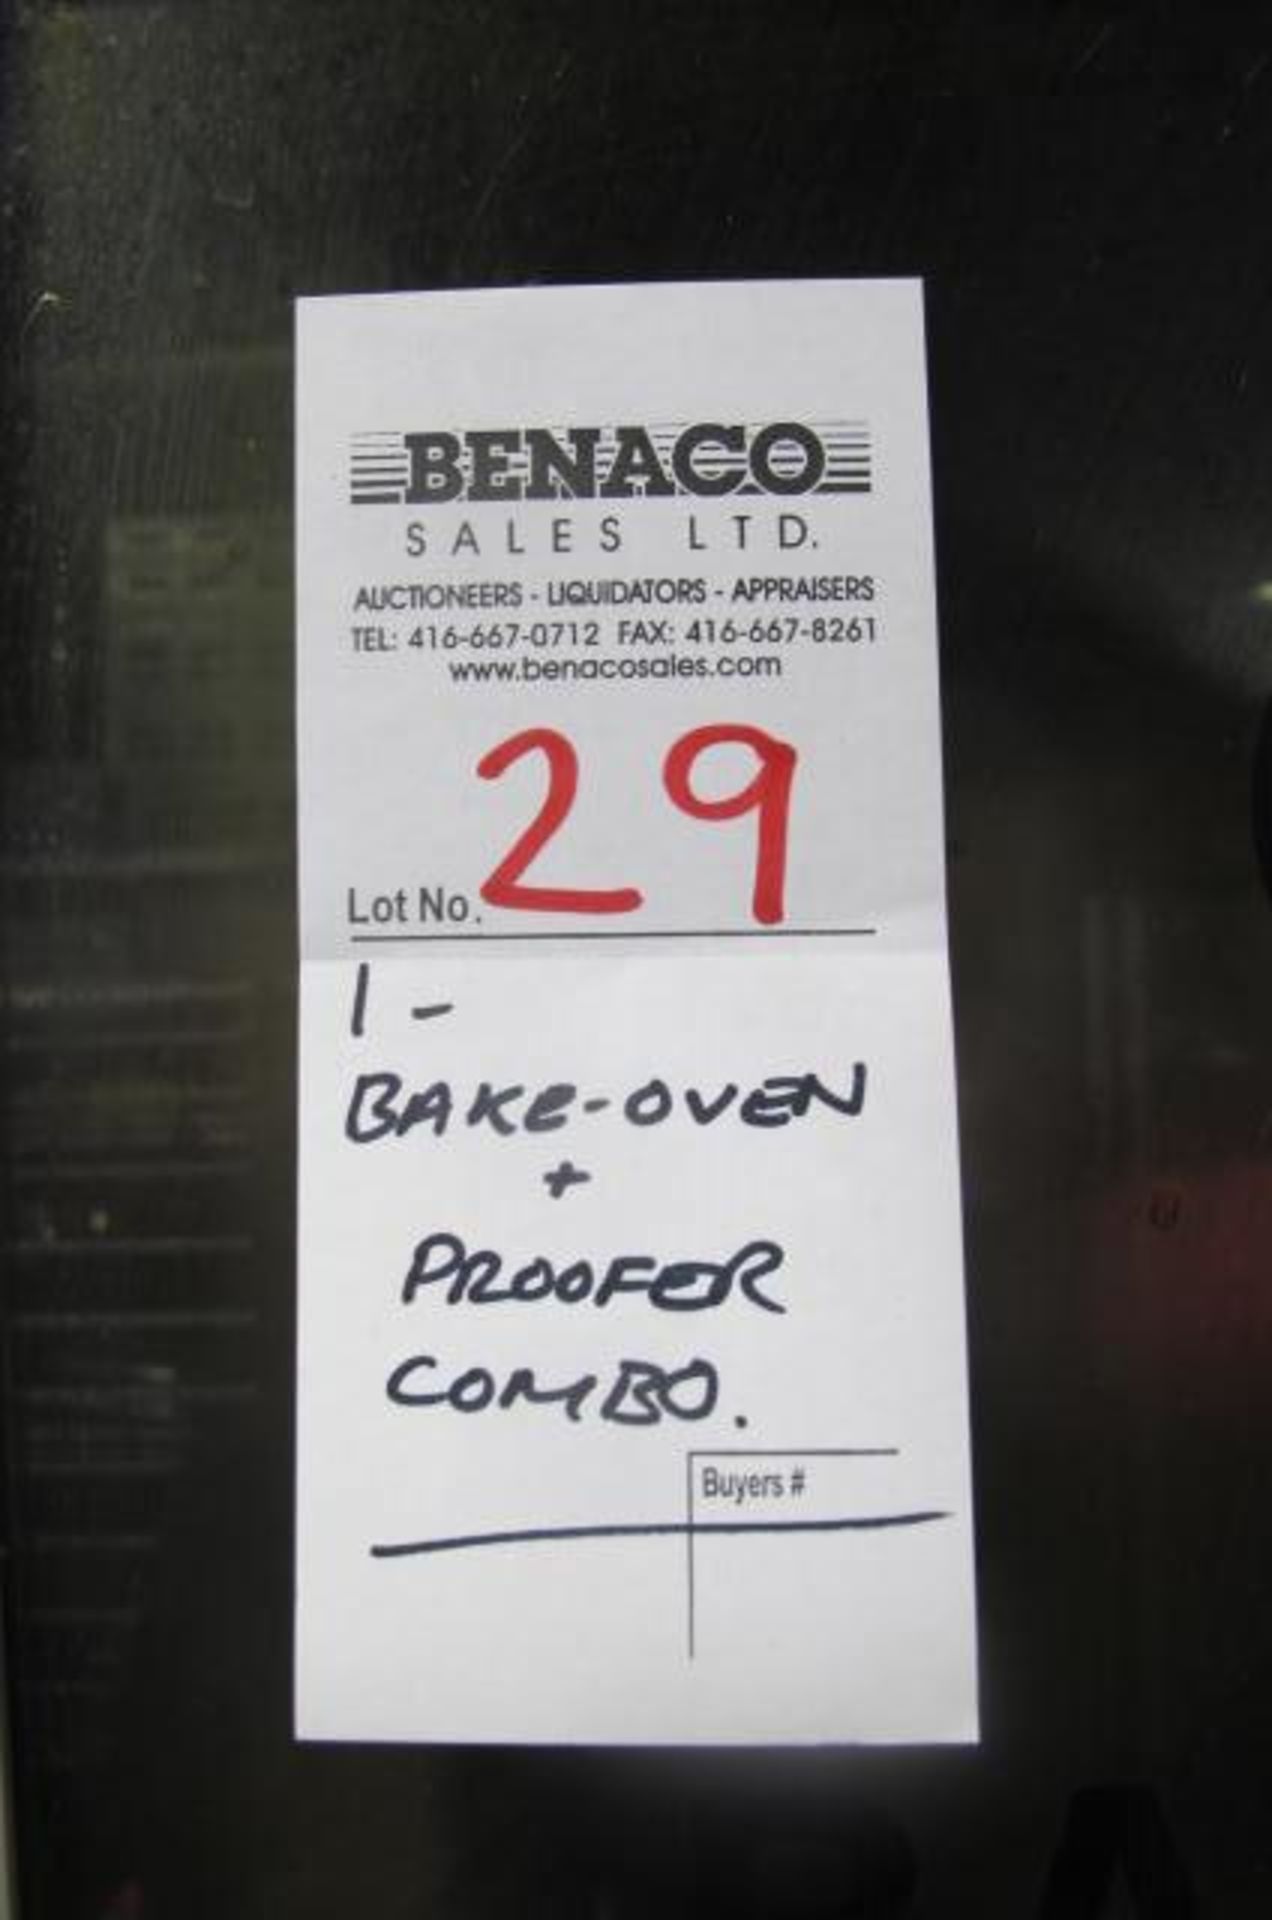 1X, BAKE OVEN & PROOFER COMBO - Image 10 of 10